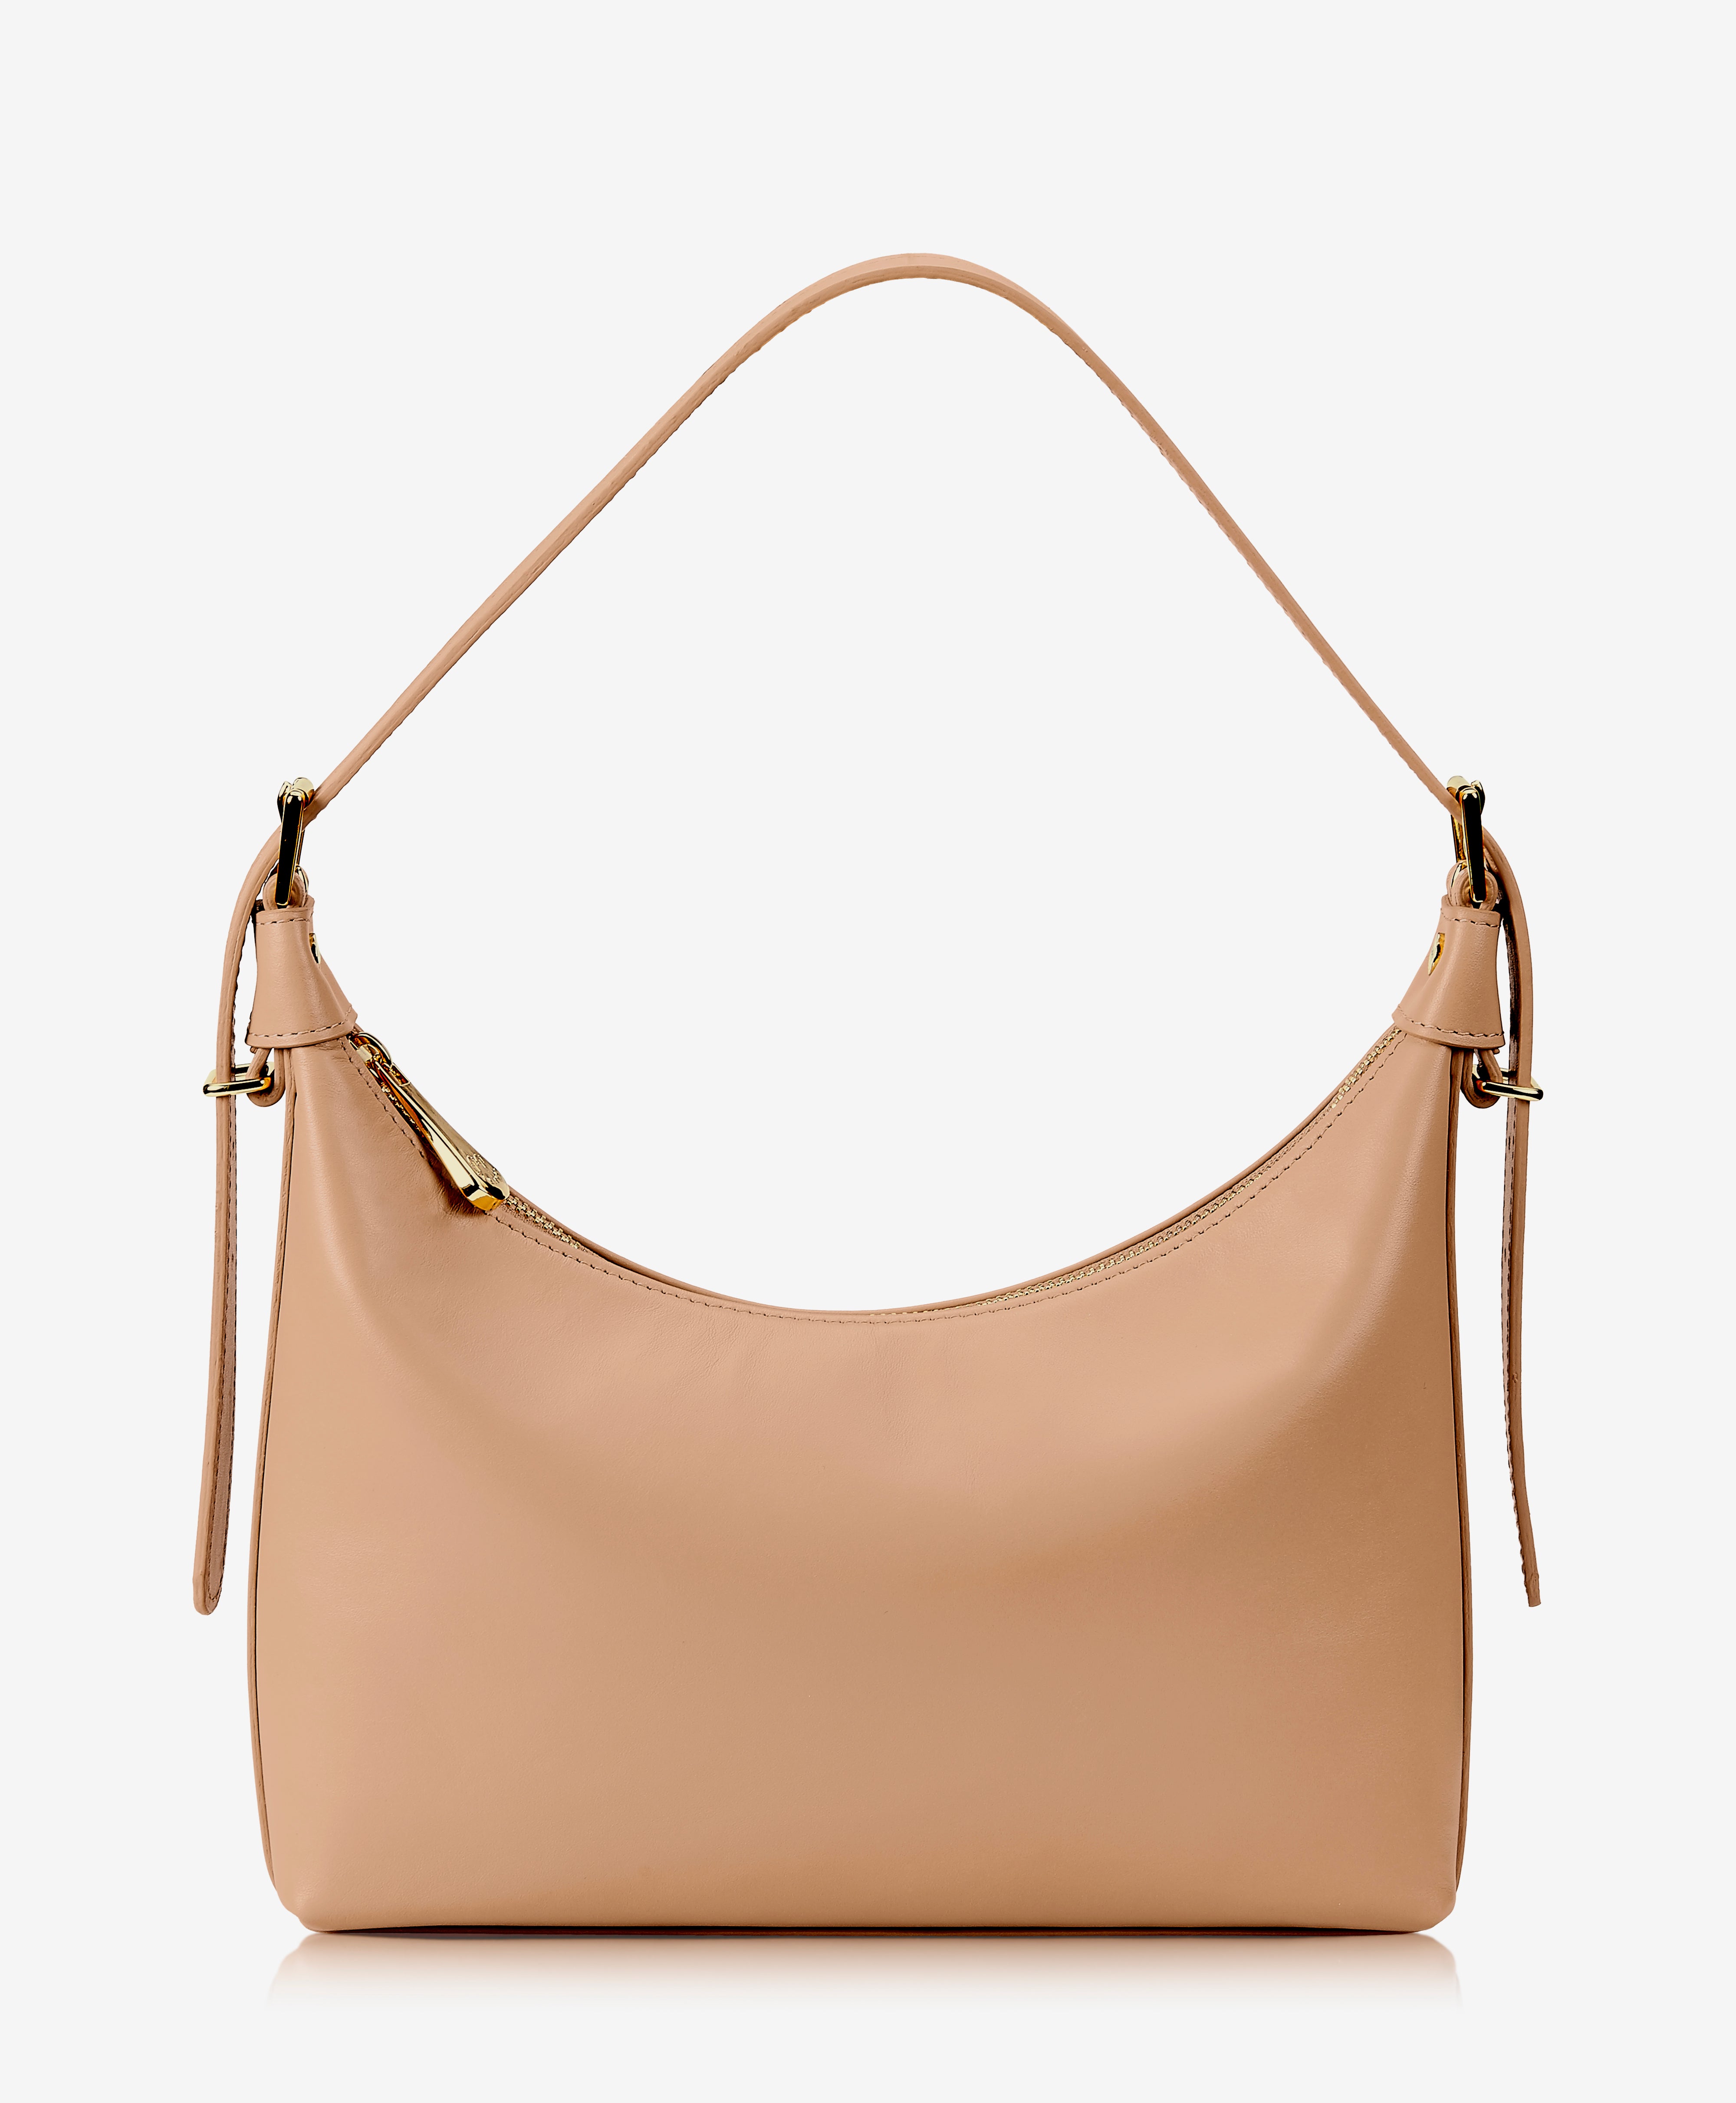 GiGi New York With Love From Kat Sag Harbor Leather Trimmed Canvas Tote,  $228, Saks Fifth Avenue